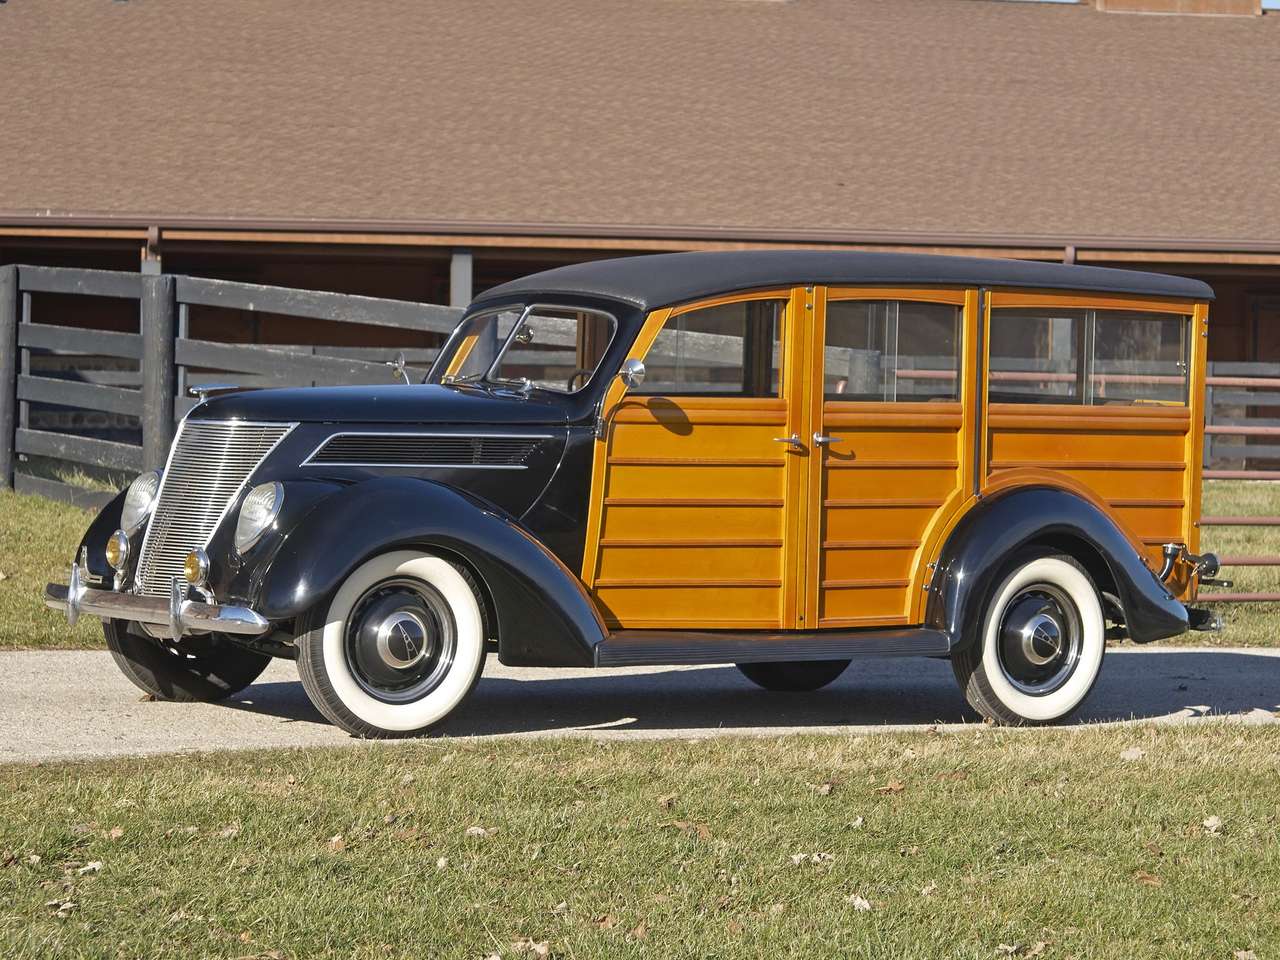 1937 FORD V-8 Stacja Deluxe Wagon puzzle online